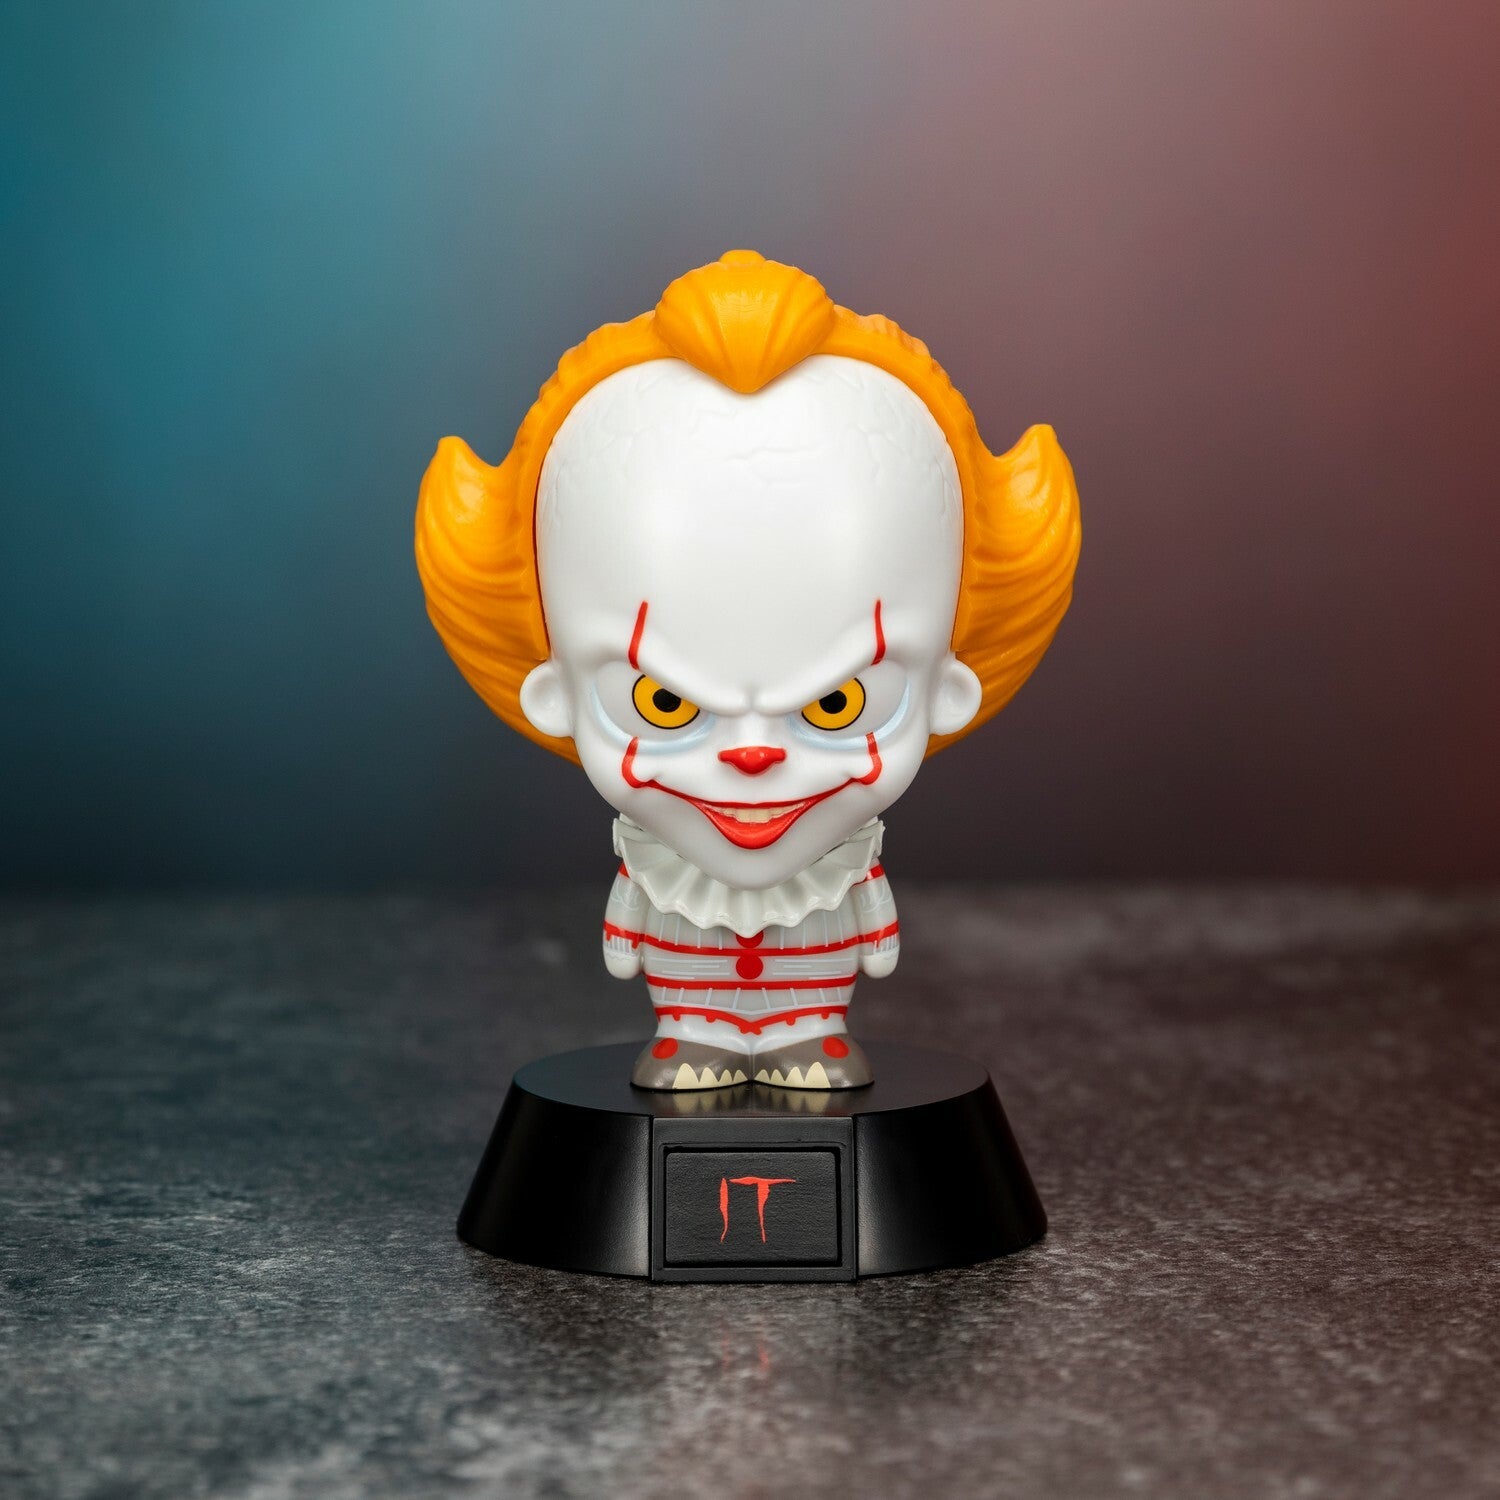  IT: Pennywise Icon Light  5055964726430